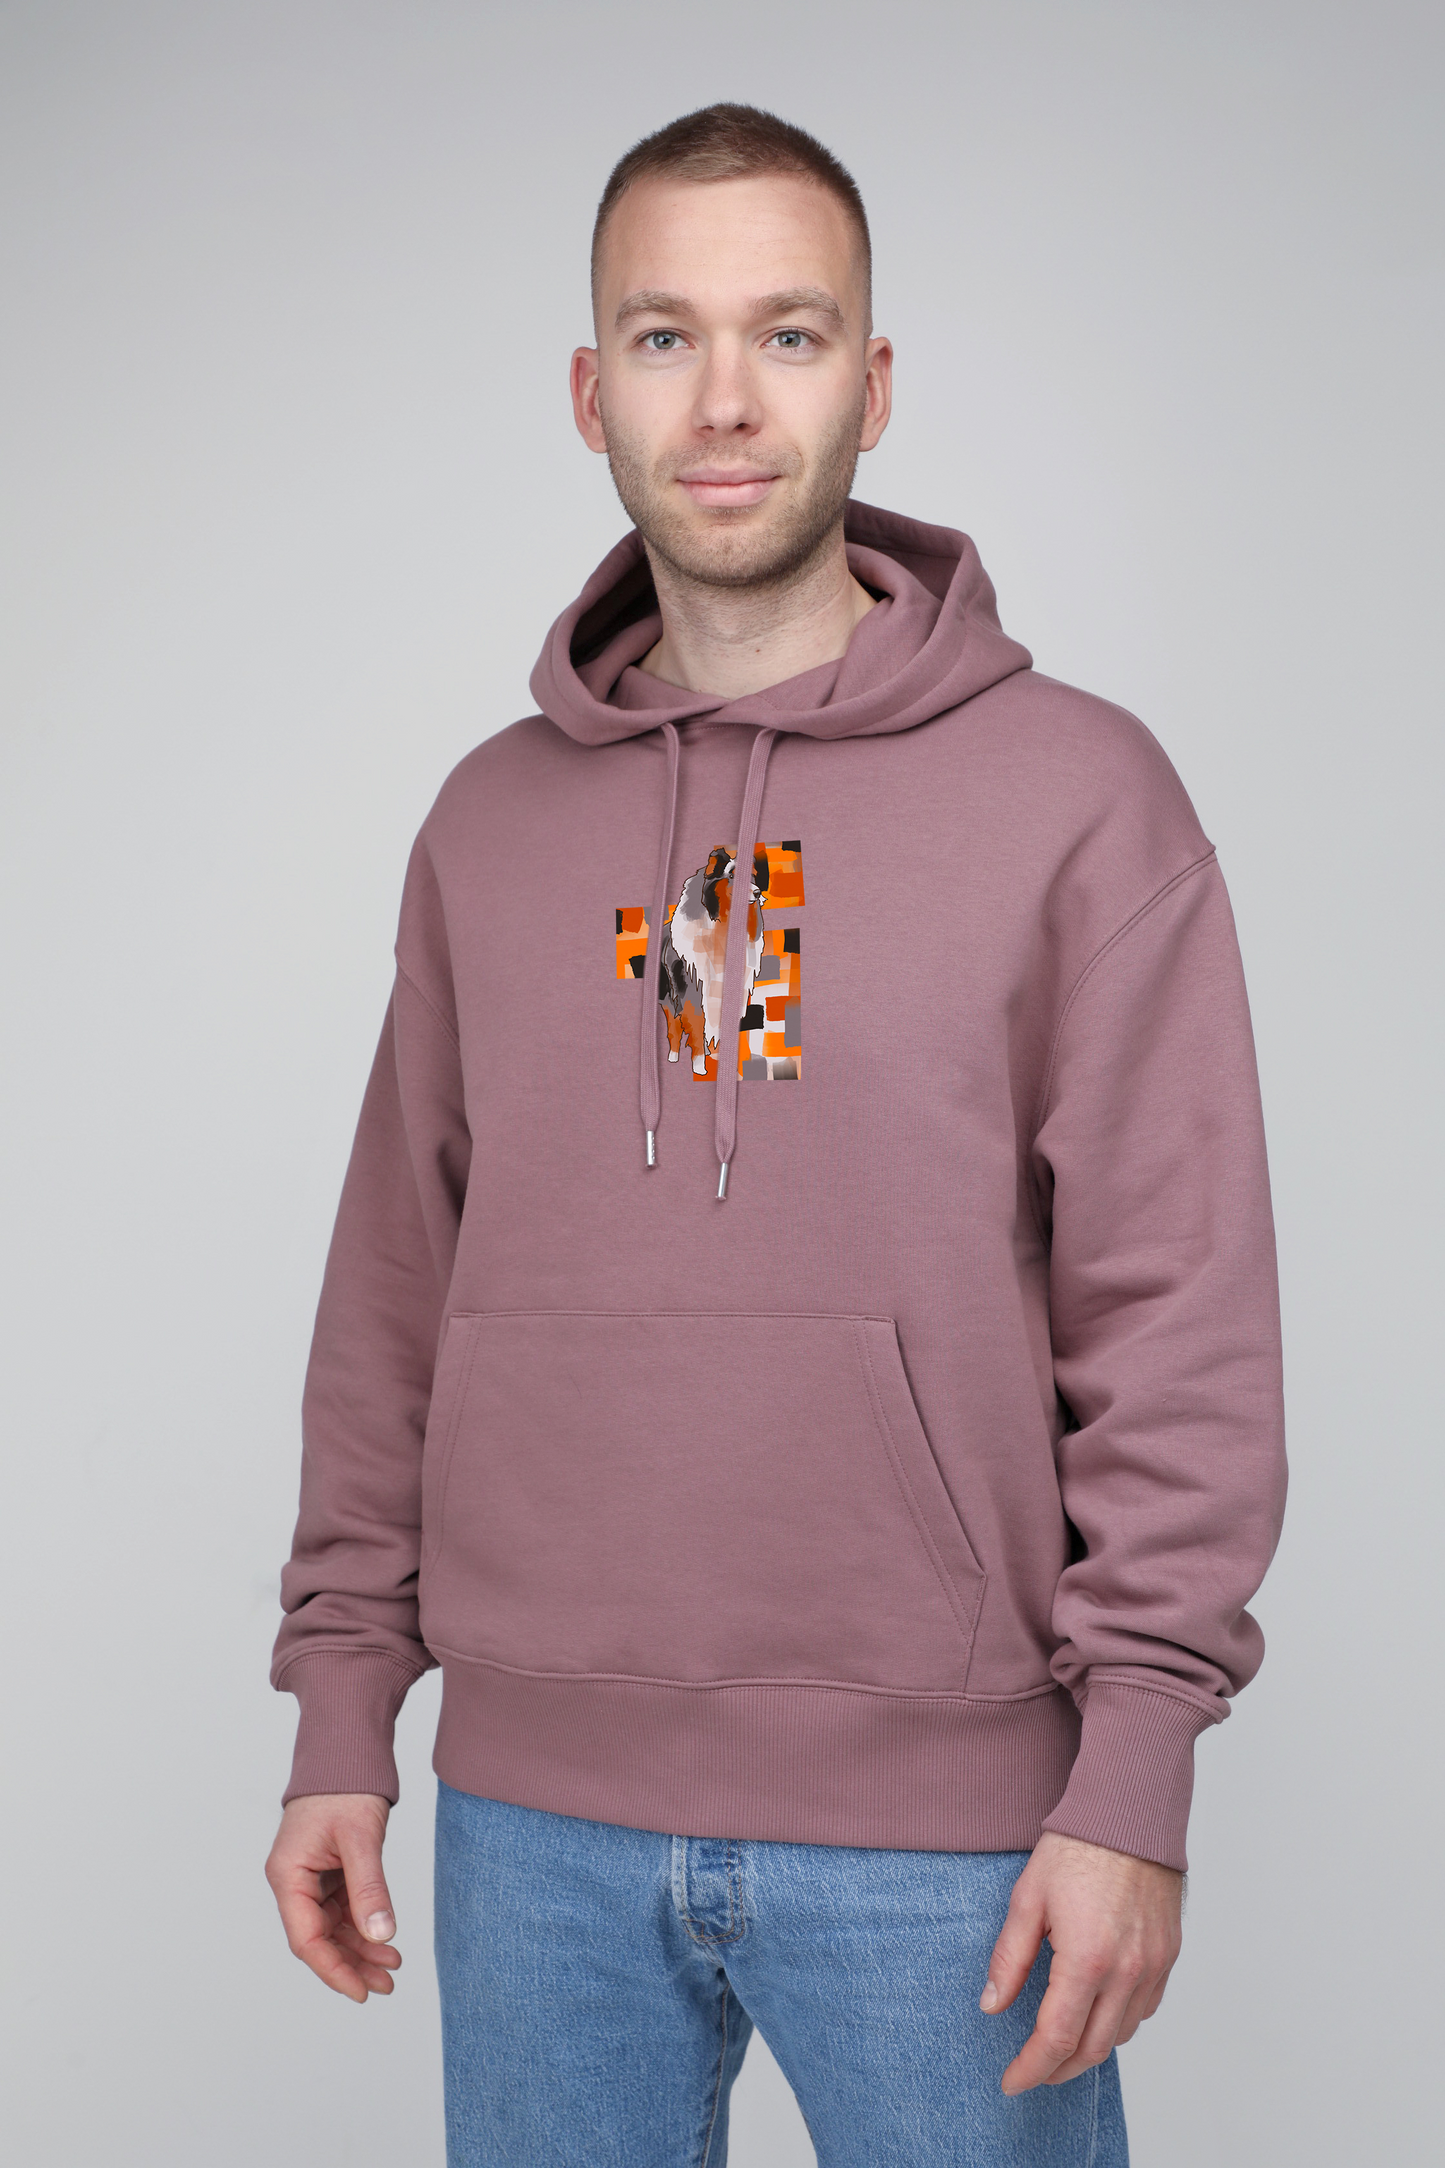 Autumn dog | Hoodie with dog. Oversize fit | Unisex by My Wild Other